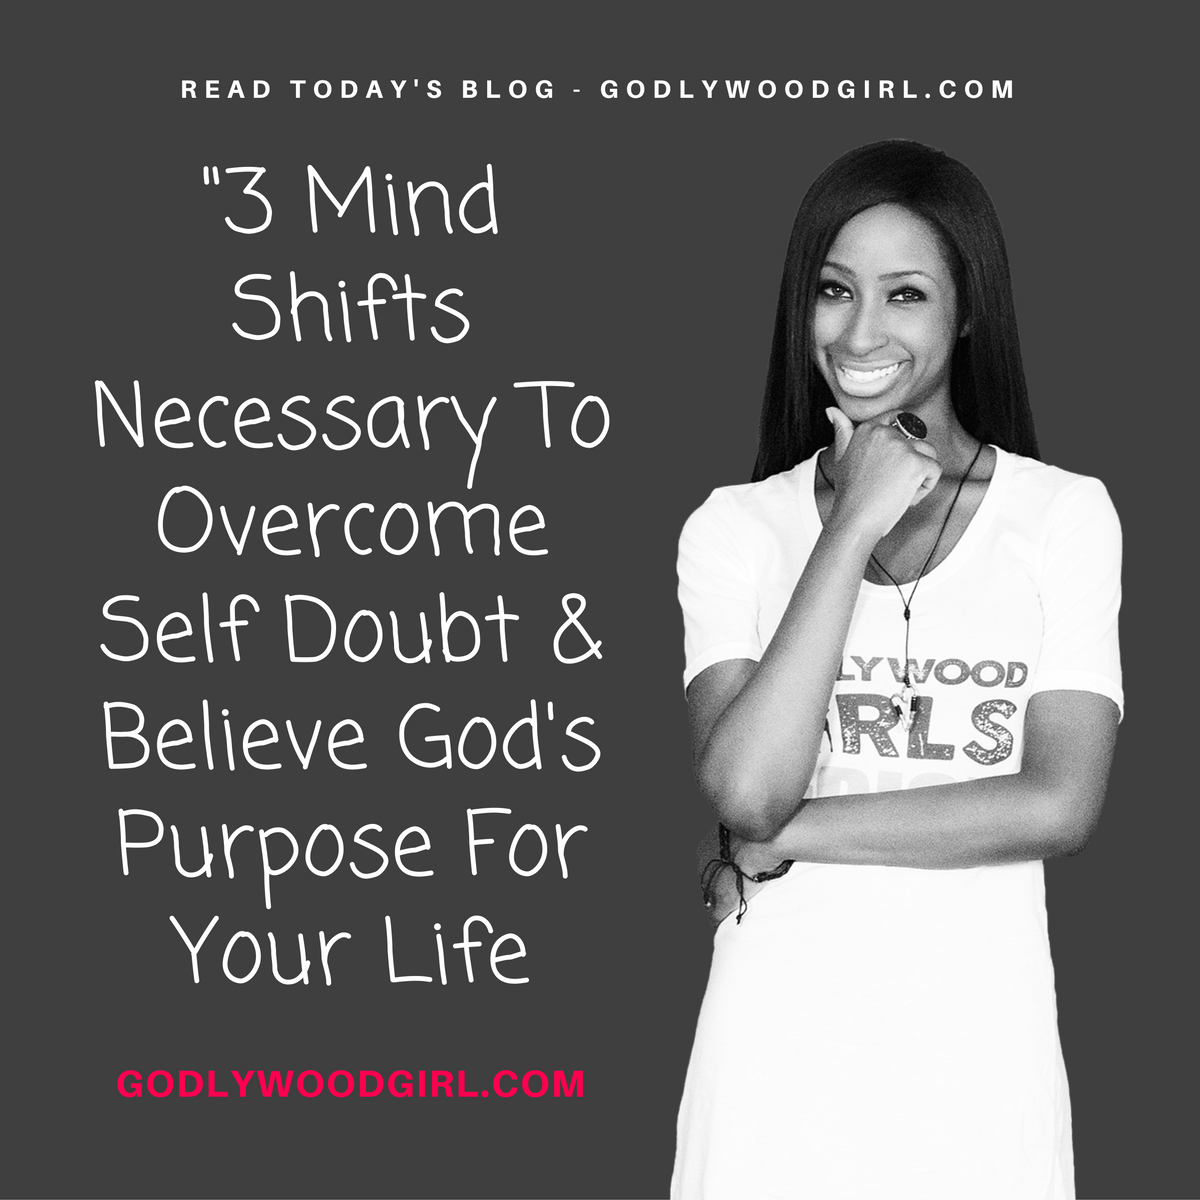 3 Mind Shifts Necessary To Overcome Self-Doubt And Believe In Your Purpose